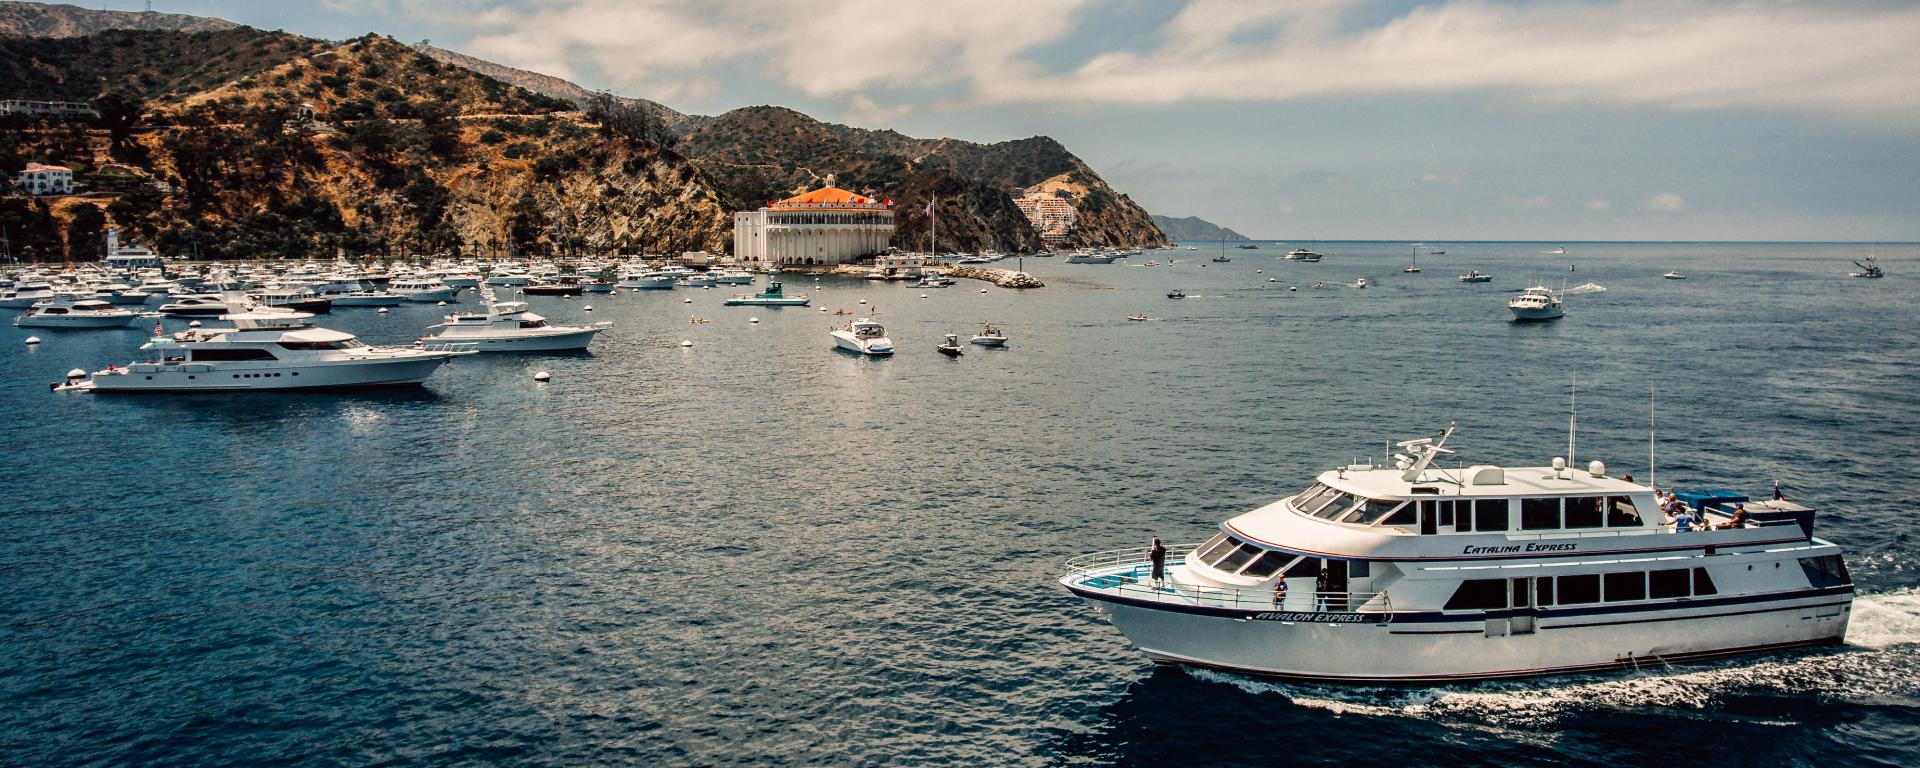 Catalina Island Hotel Ferry Packages | Find Lodging